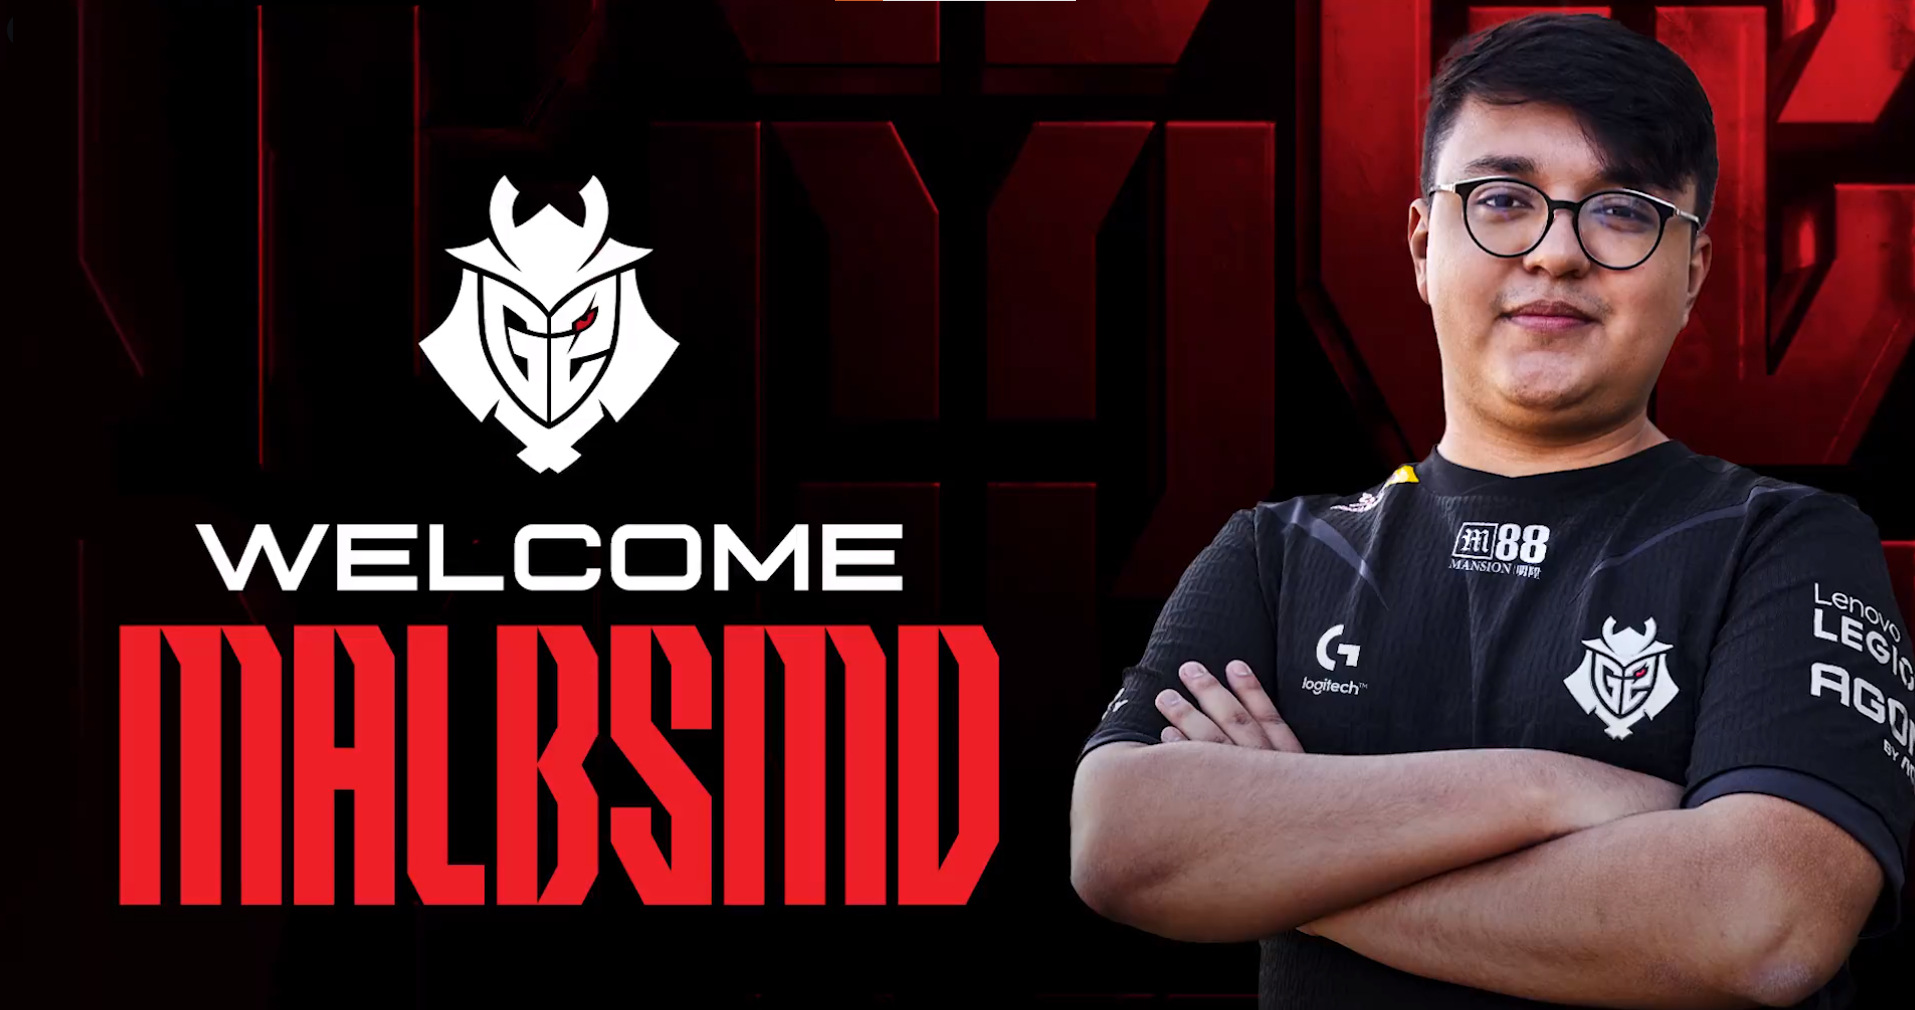 malbsMd Confirmed as New Player for G2 Esports